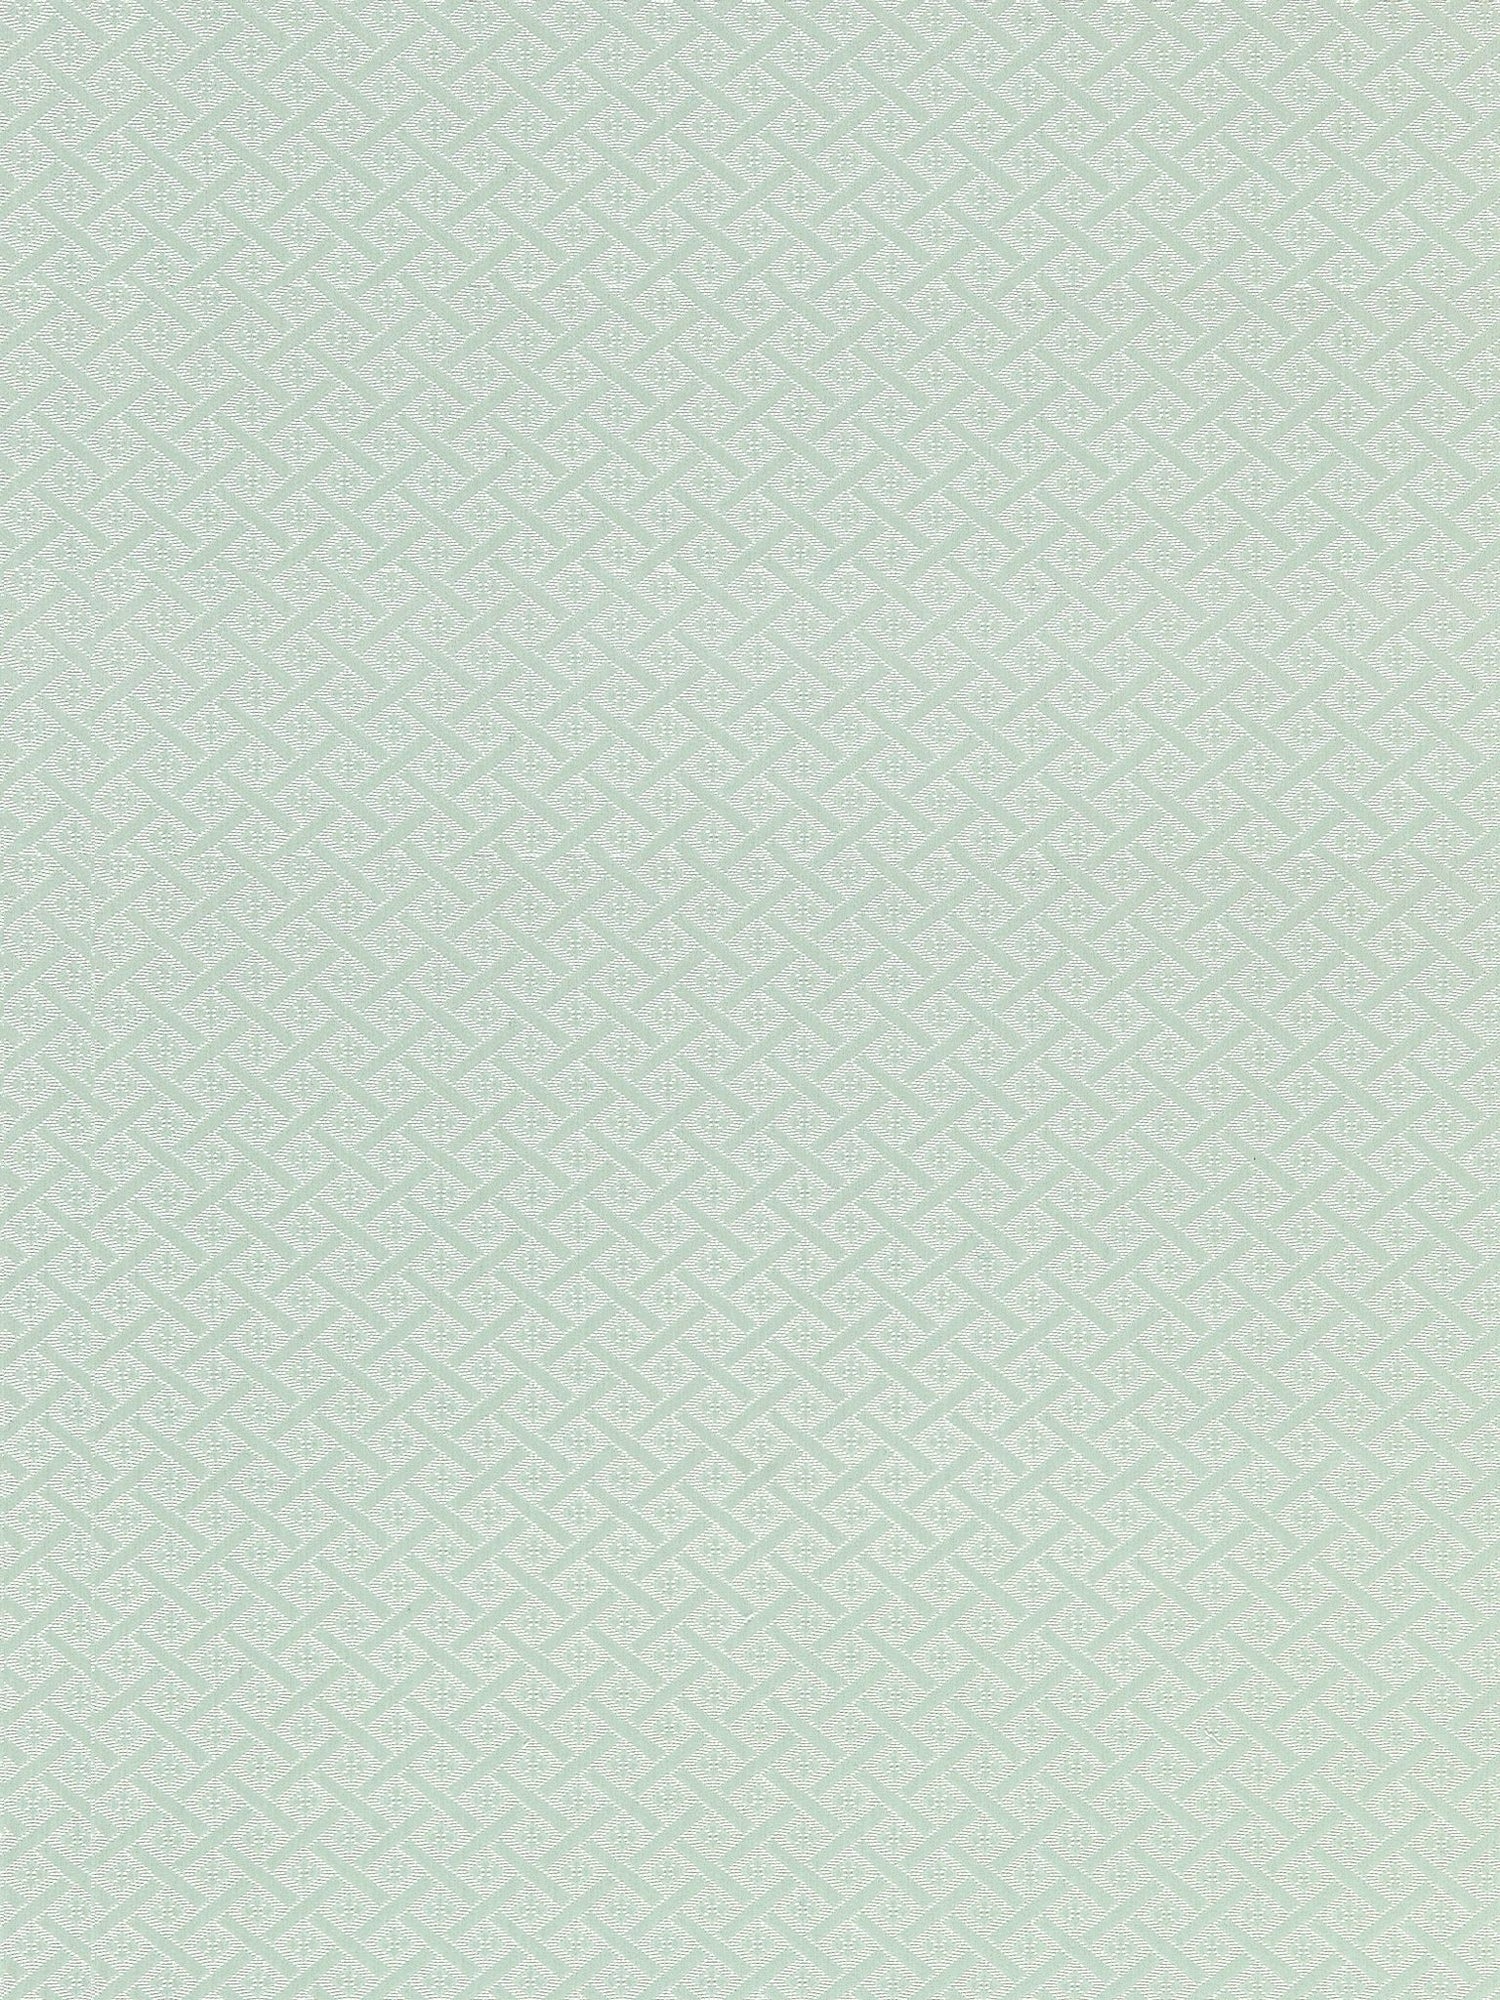 Diamante Matelasse fabric in seaglass color - pattern number SC 000227223 - by Scalamandre in the Scalamandre Fabrics Book 1 collection